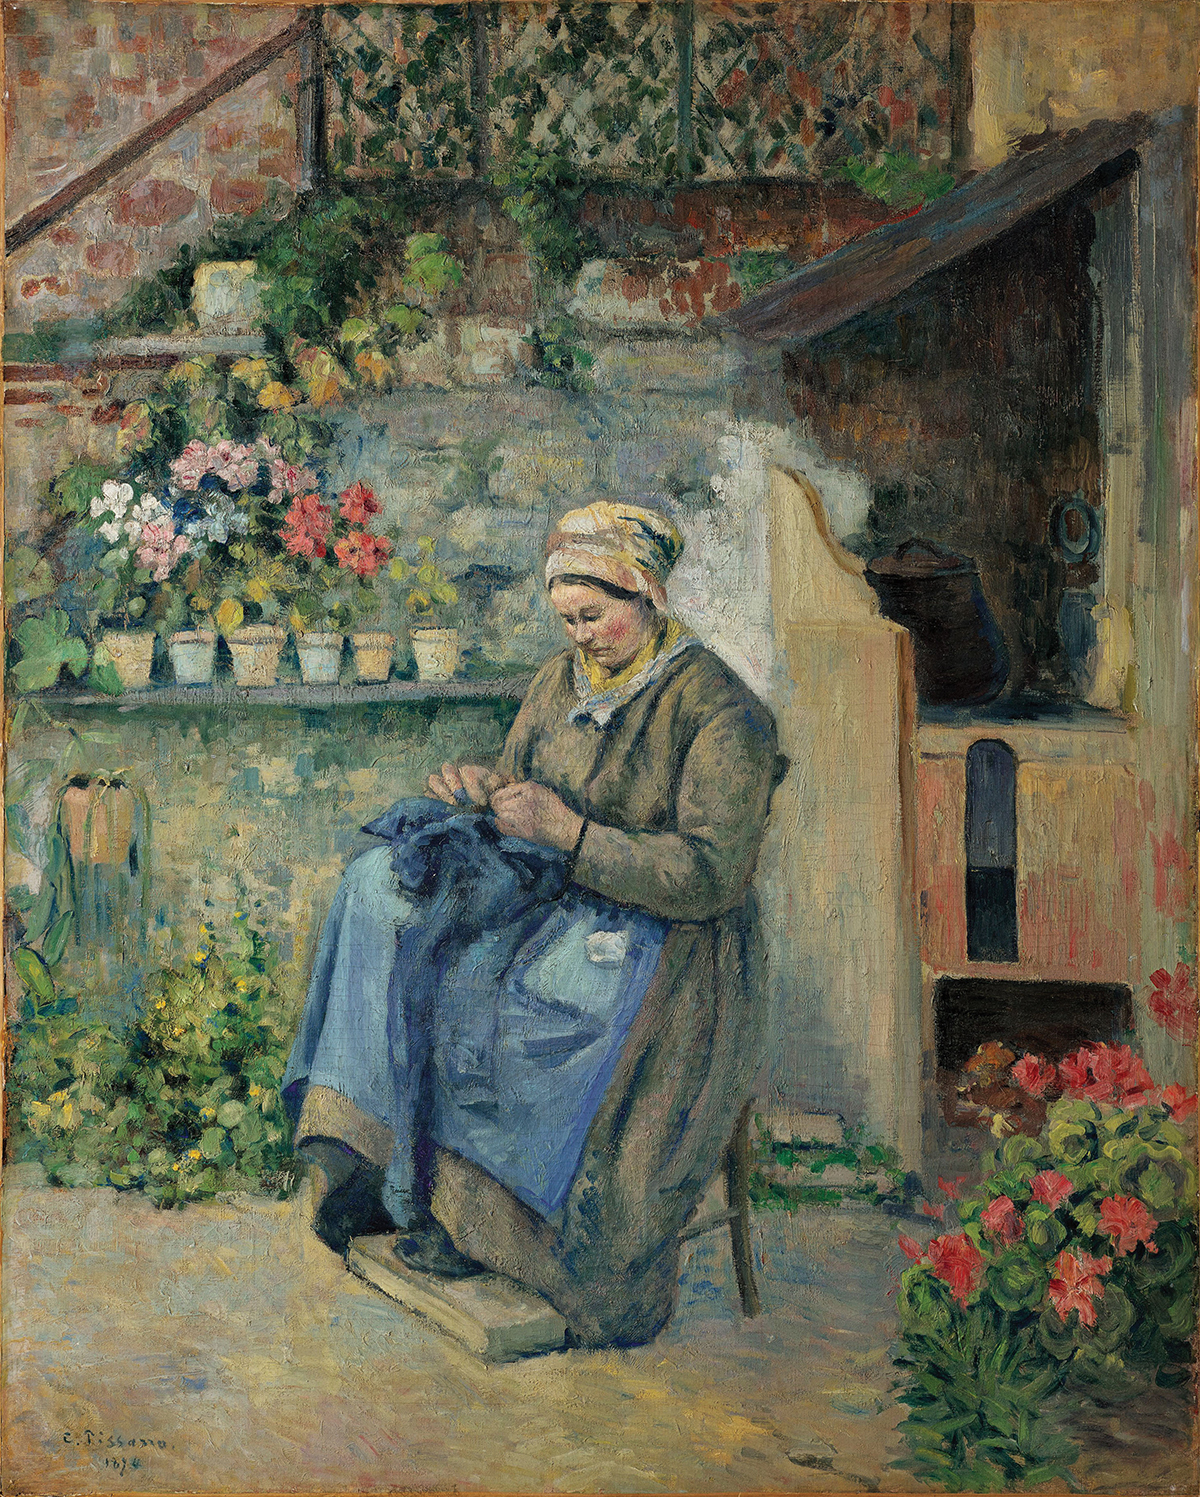 Painting of a woman in a bonnet mending clothes in front of a wall of potted flowers.